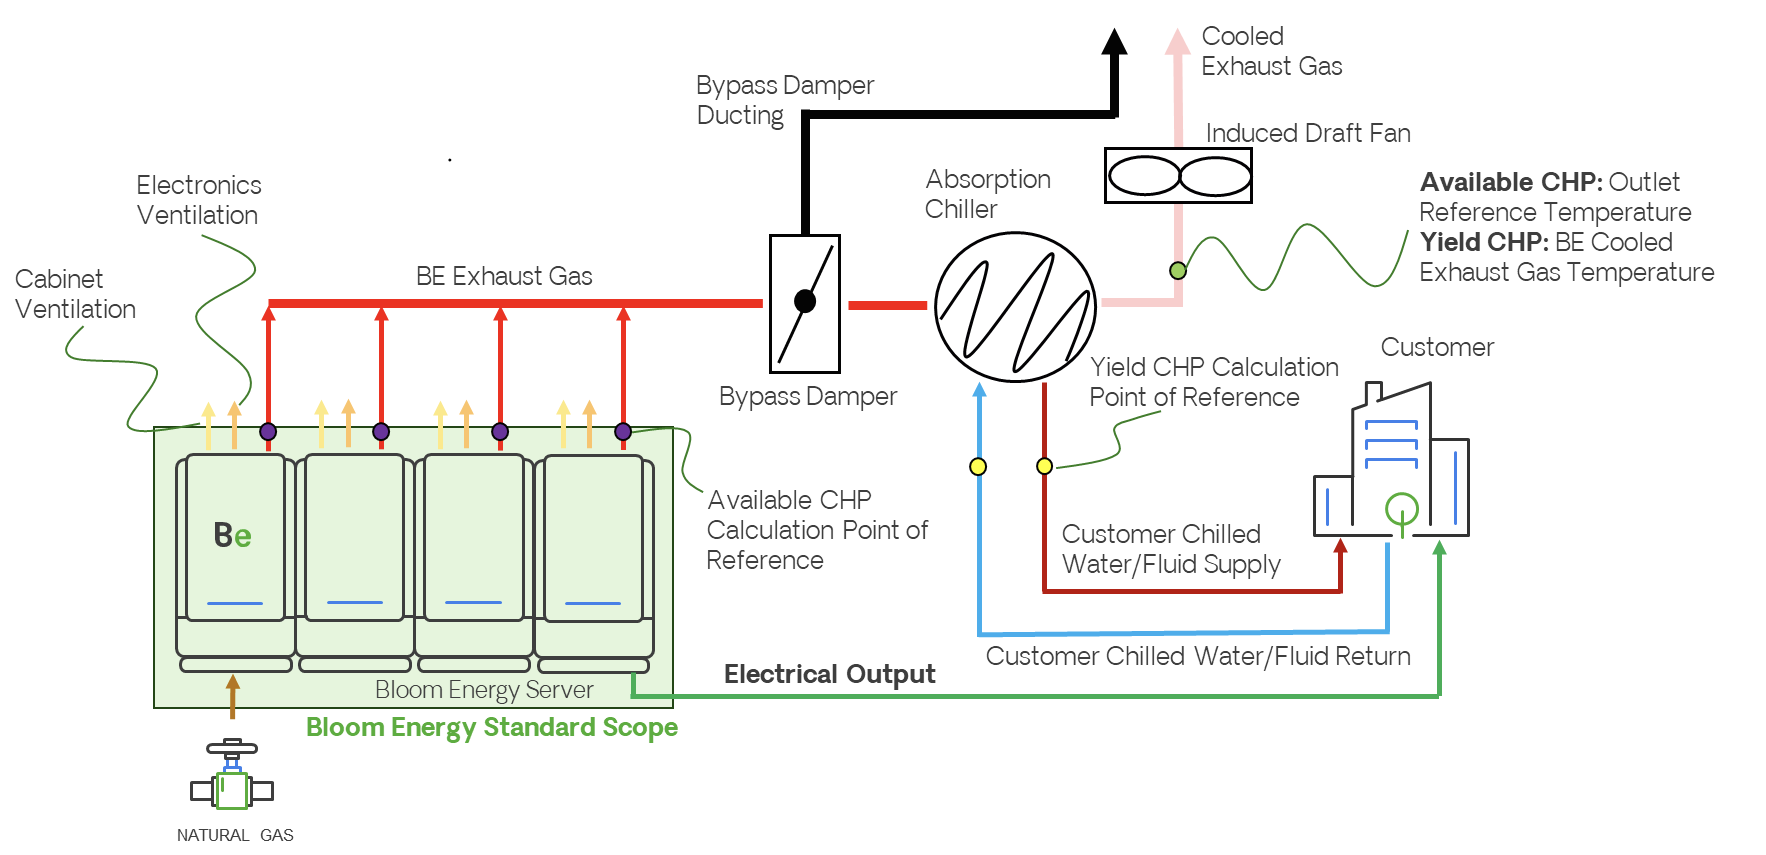 Typical Applications of Heat Capture Technology